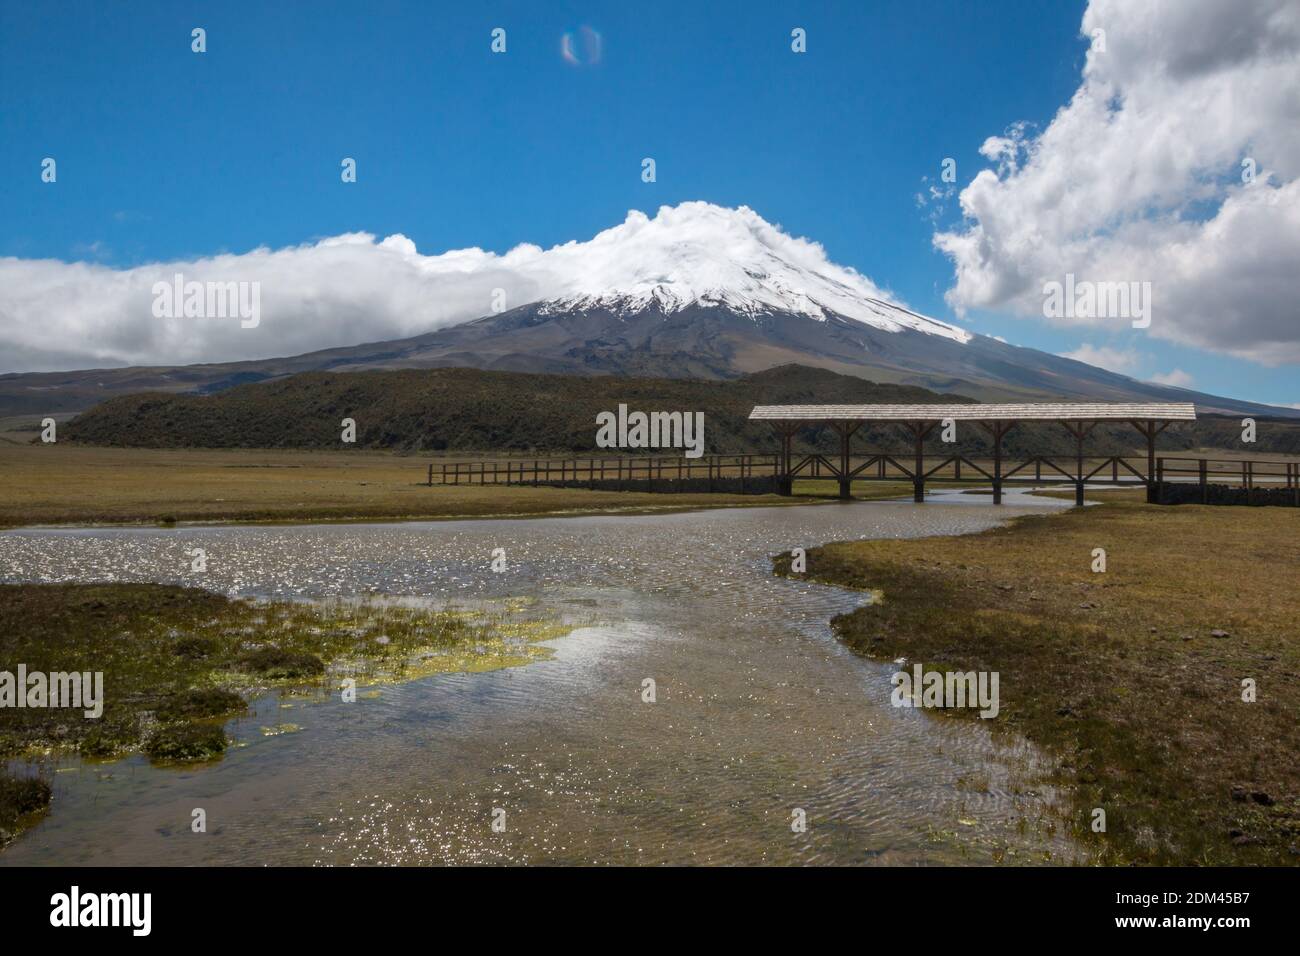 The snowcapped Cotopaxi Volcano with a lake  (Laguna Limpiopungo) and footbridge in foreground. Cotopaxi National Park in the Ecuadorian Andes. Stock Photo